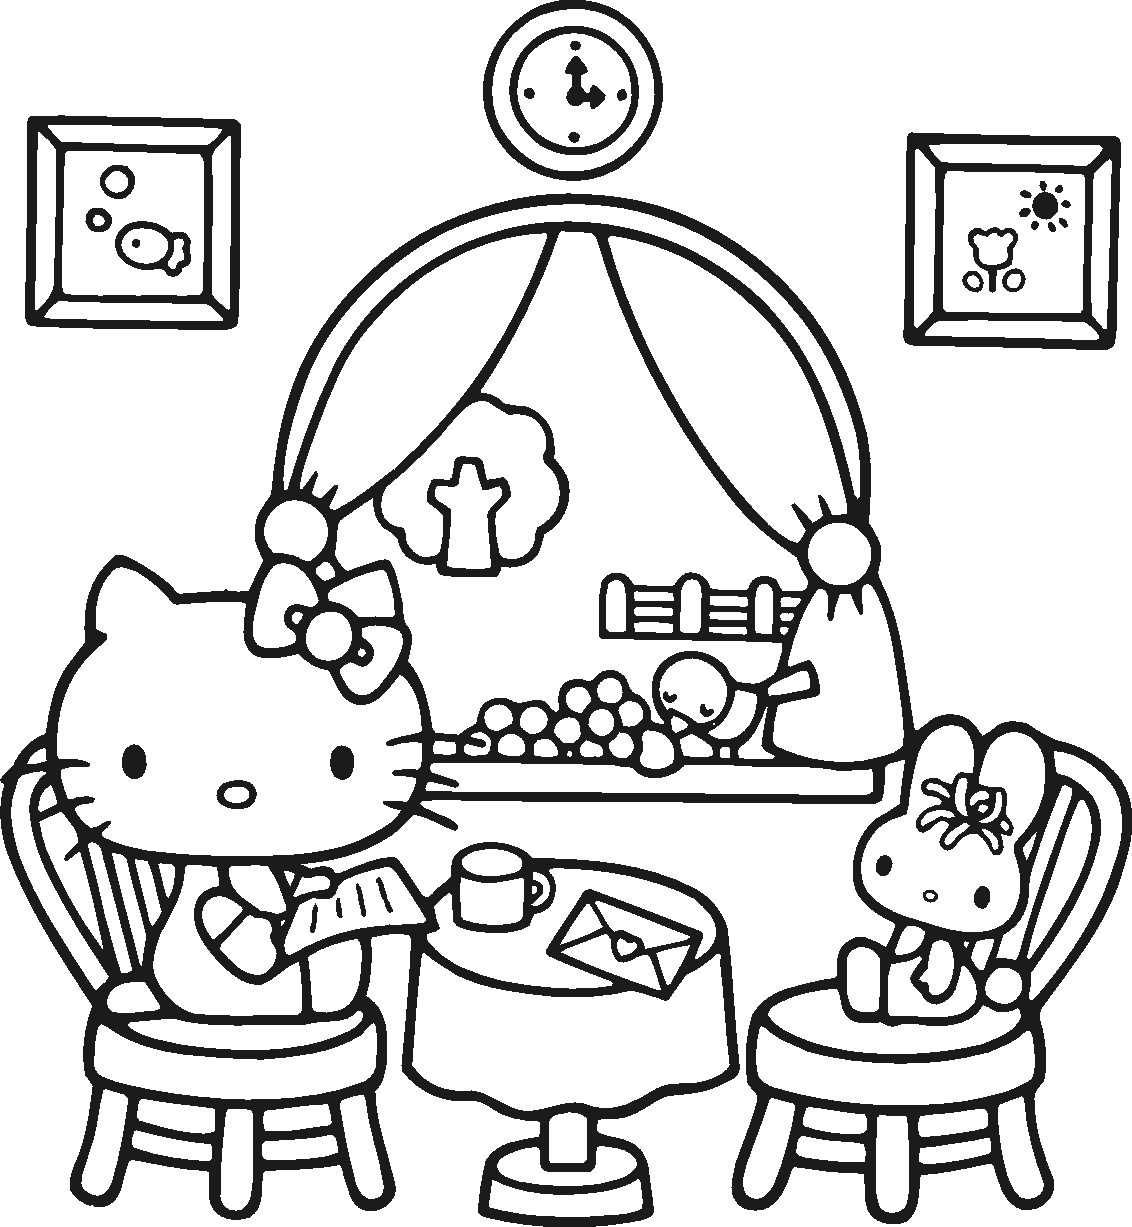 hello kitty valentines coloring pages